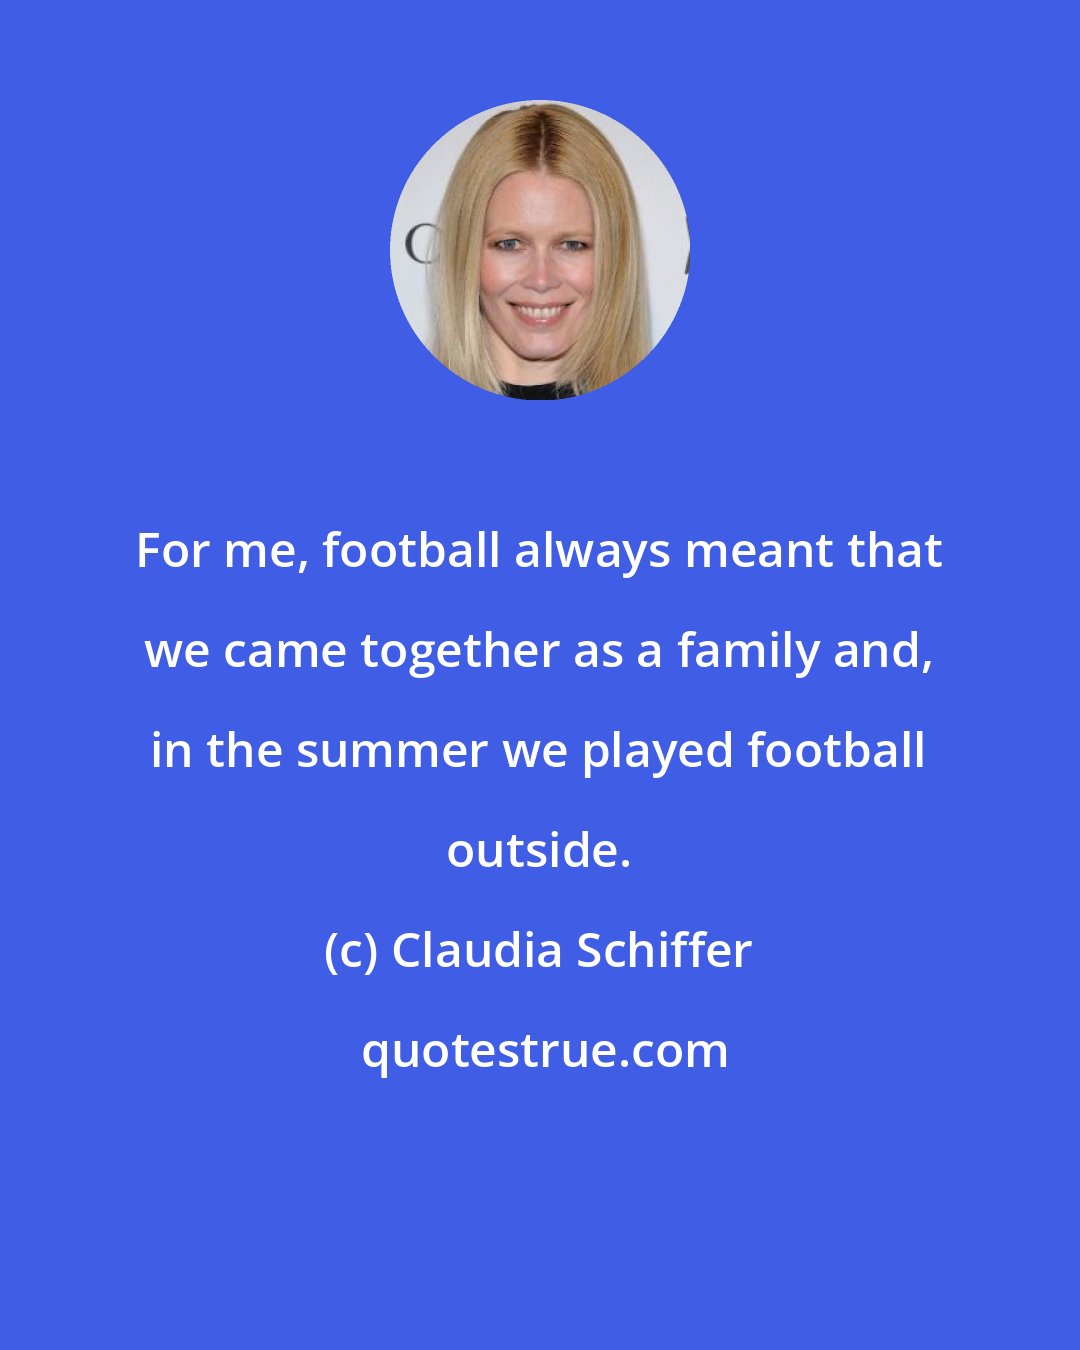 Claudia Schiffer: For me, football always meant that we came together as a family and, in the summer we played football outside.